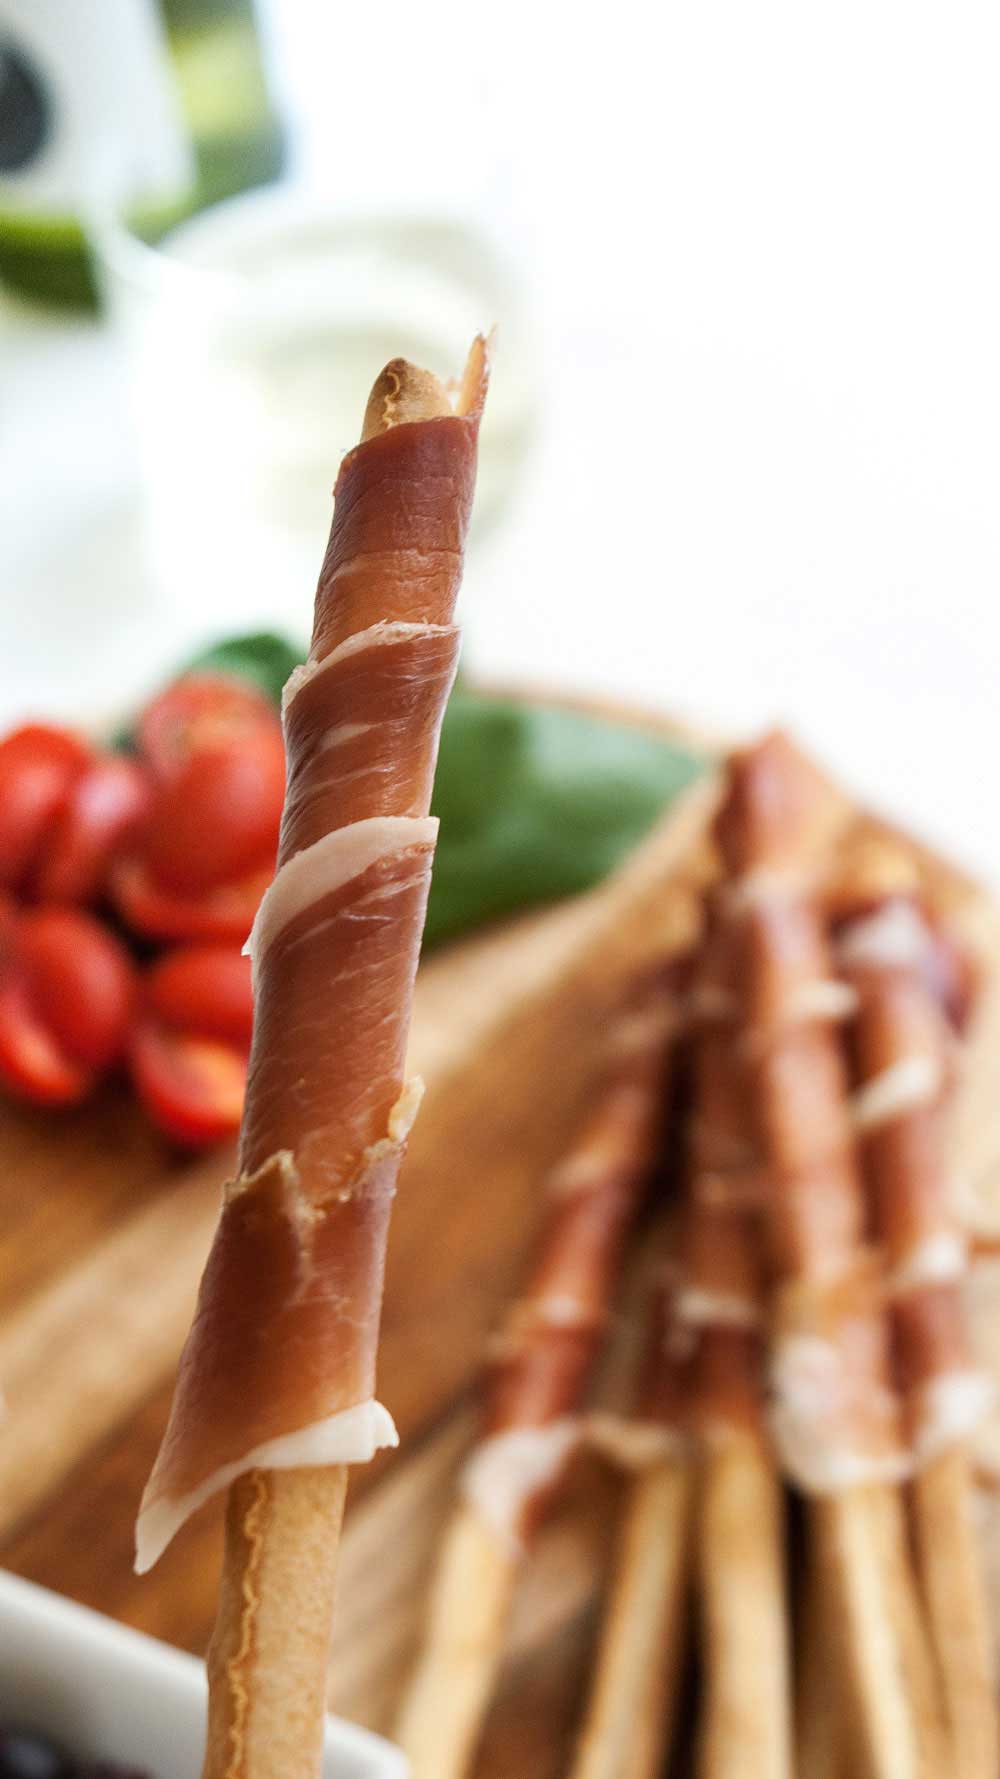 Homemade Grissini. Gnarly, crunchy breadsticks perfect for dipping. Wrap them in prosciutto for an elegant and easy entertaining idea.